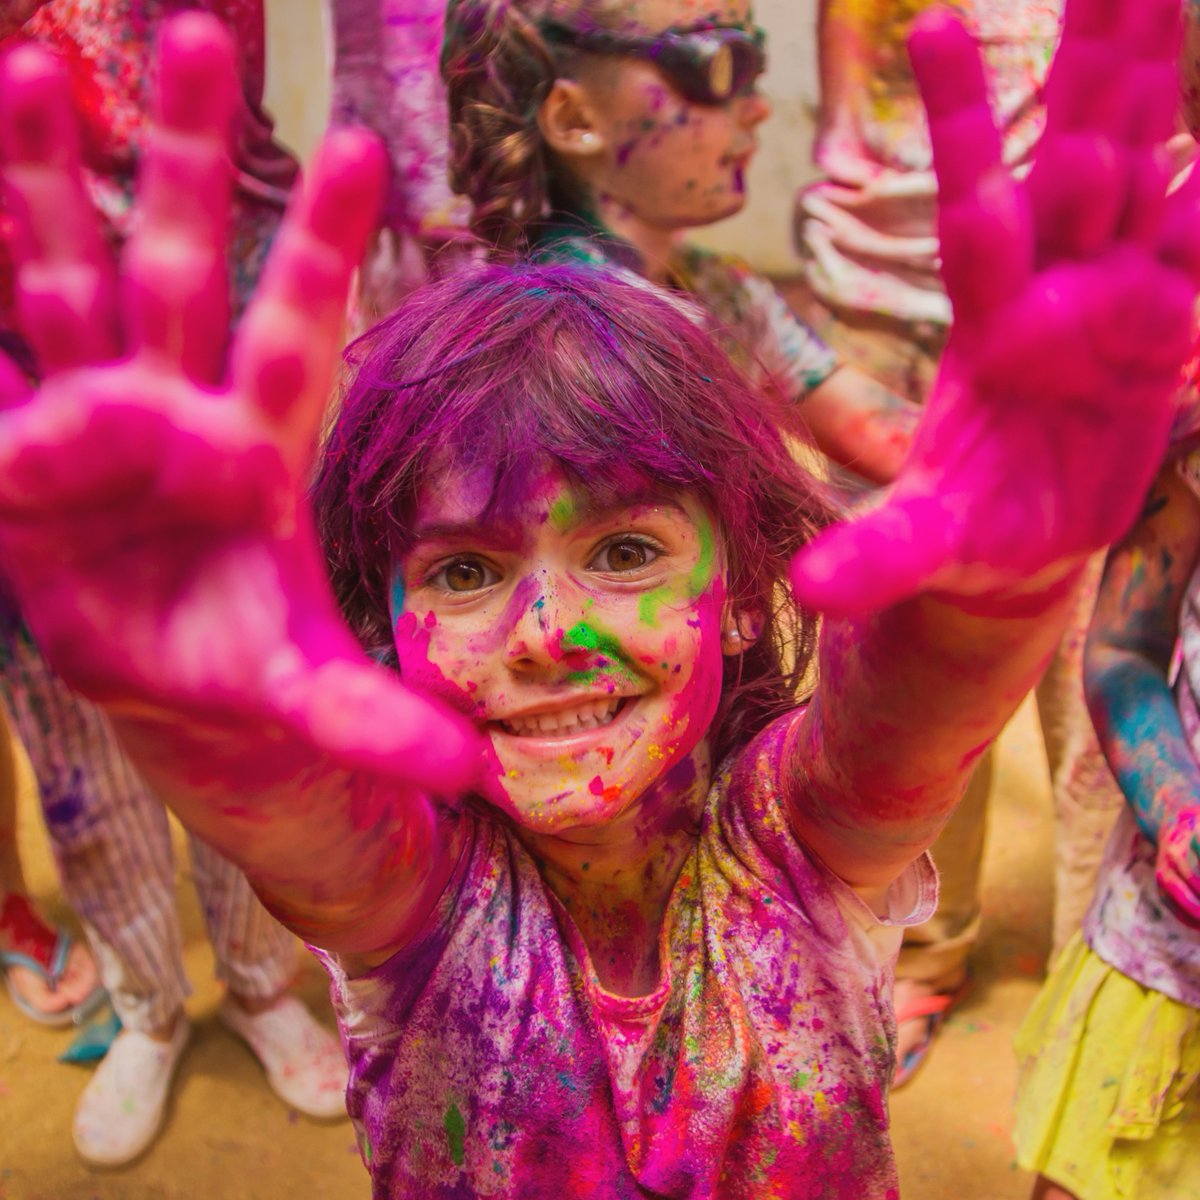 Happy #Holi to all who celebrate! As we embrace the festival of colors, let's also welcome the promise of new beginnings and shared happiness. Wishing everyone a day filled with joy, laughter, and togetherness. #Hellohumankindness